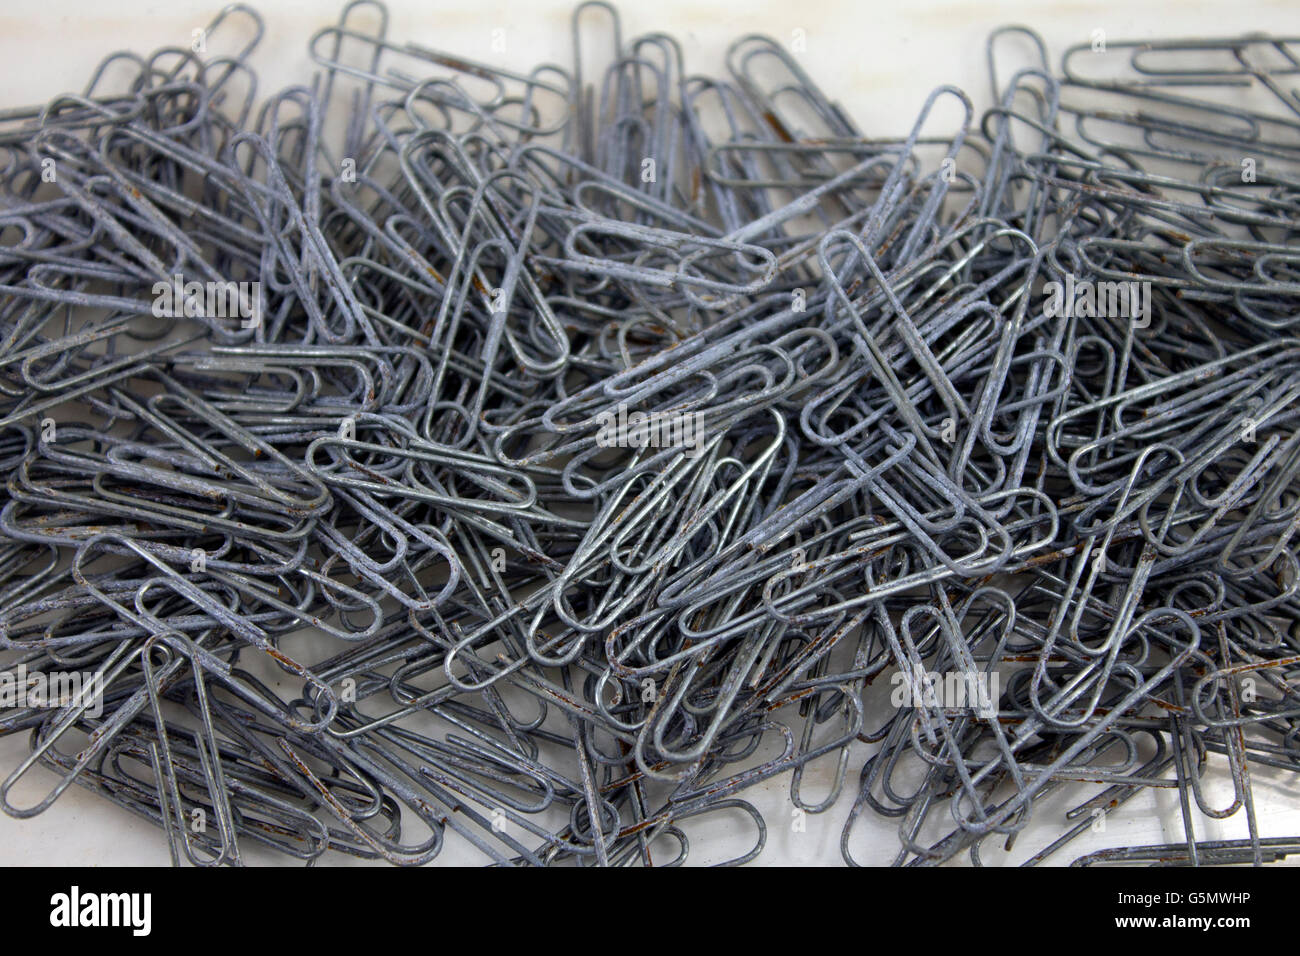 Pile of old paper clips Stock Photo